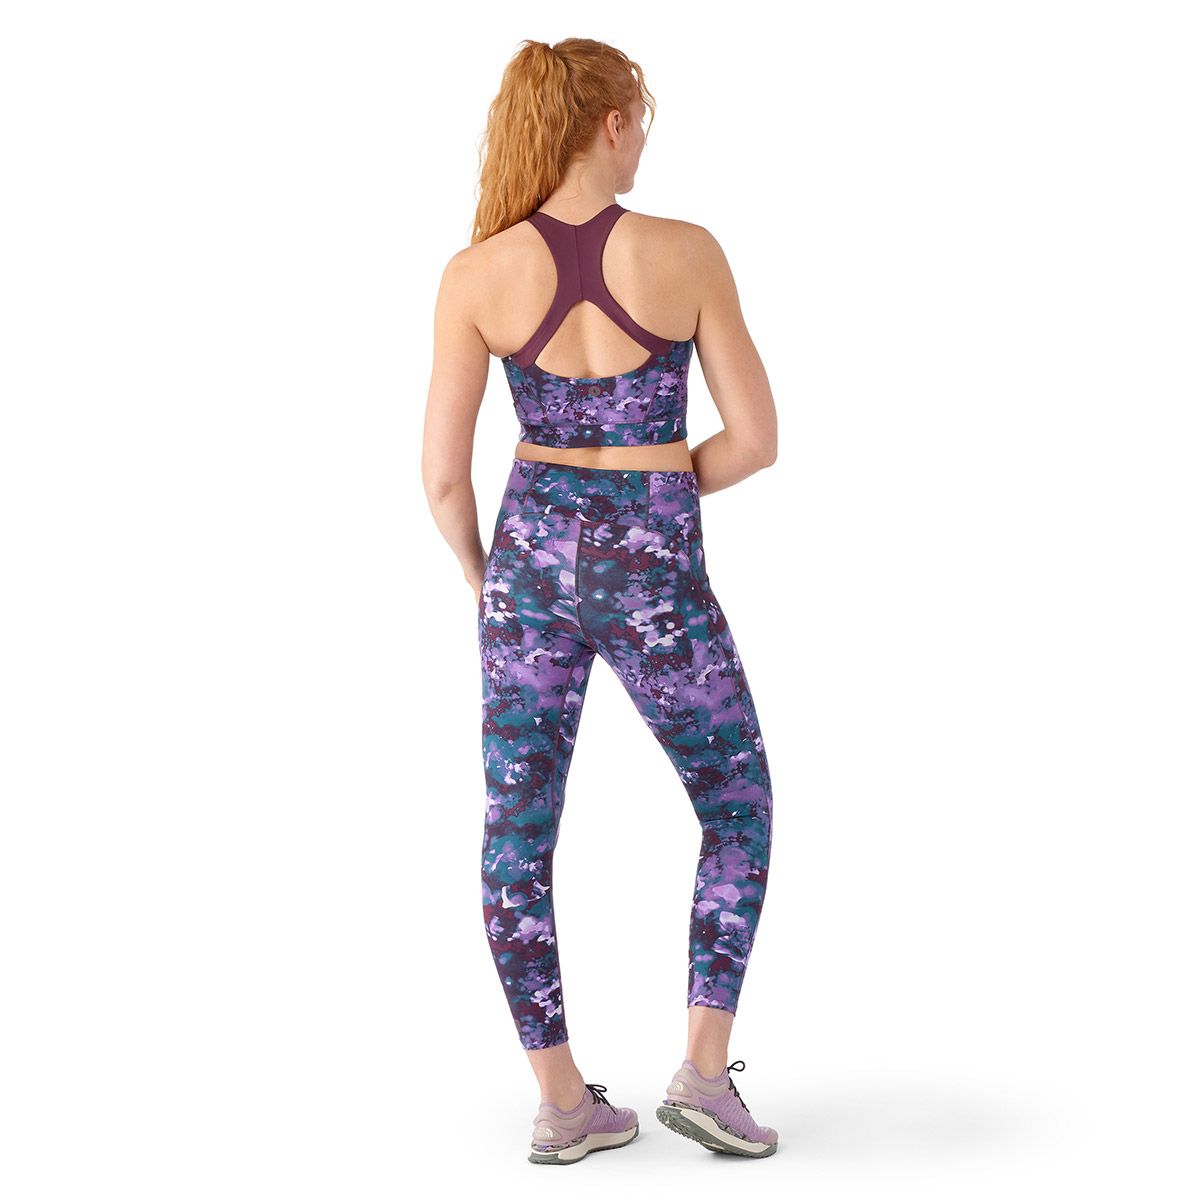 Articulated zone thermal legging, Smartwool